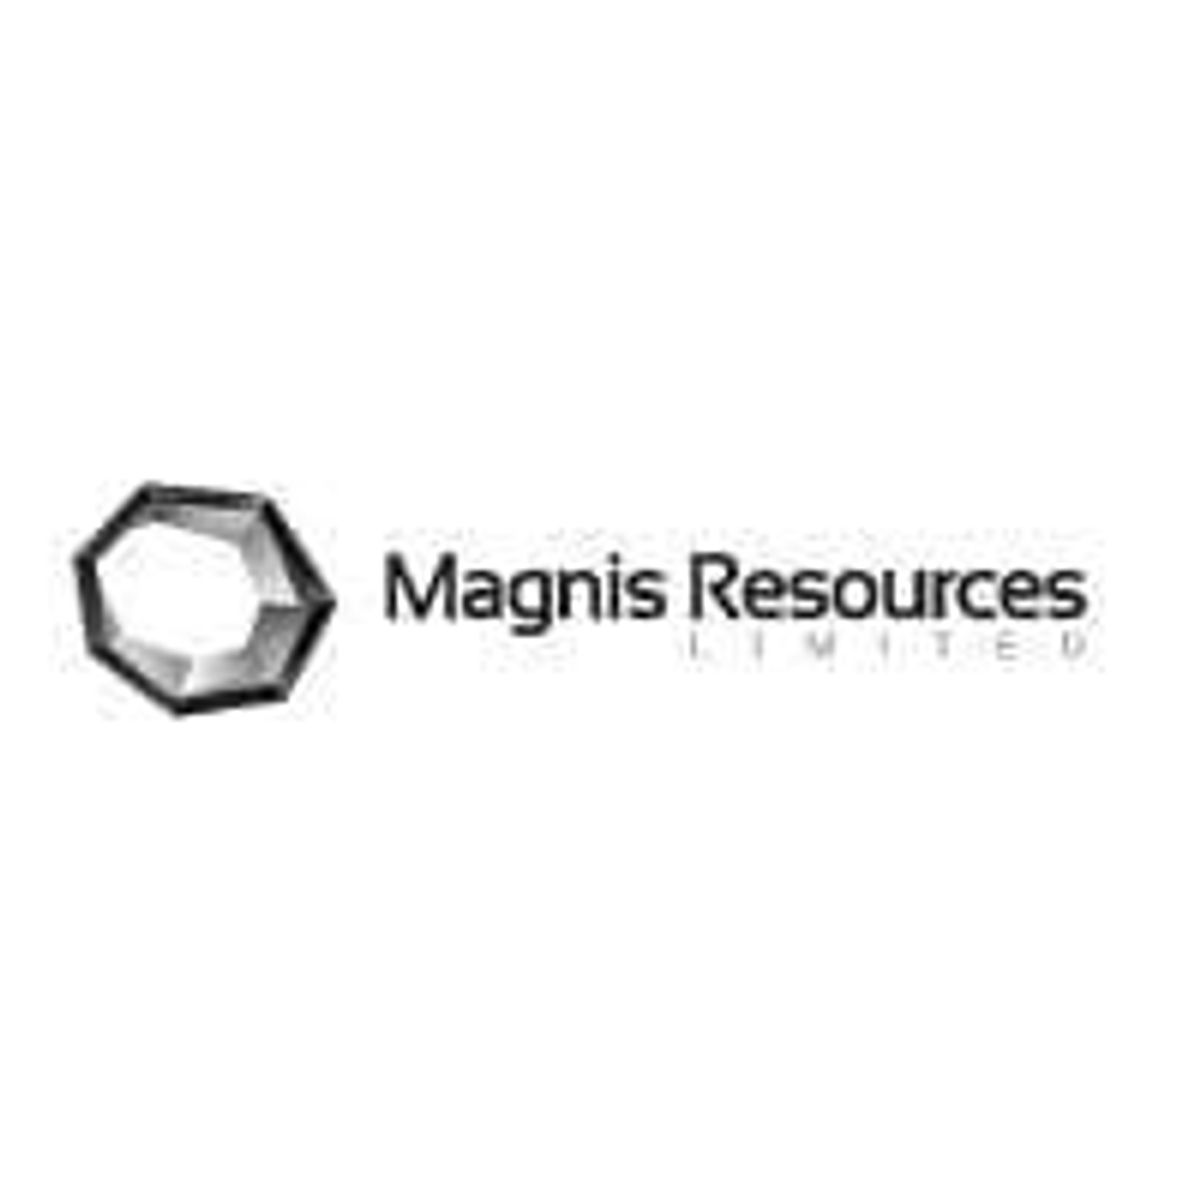 The Hon. Warwick Smith AM appointed  on the Magnis Board of Directors